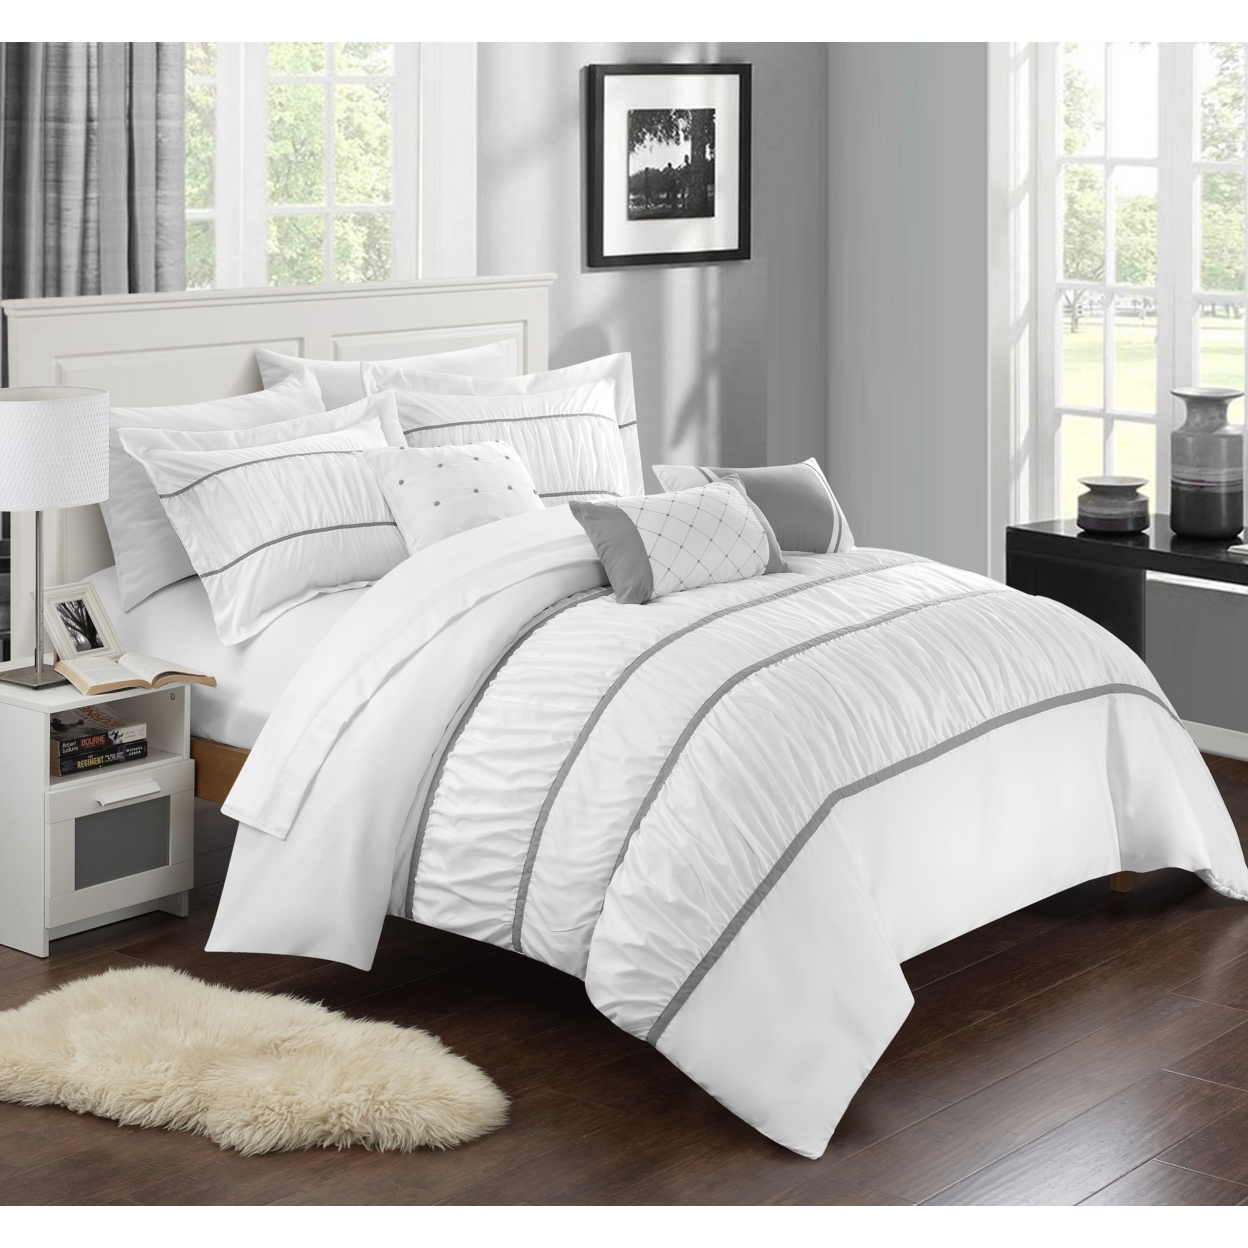 10-Piece Aero Pleated & Ruffled Bed In A Bag Comforter And Sheet Set - White, Queen